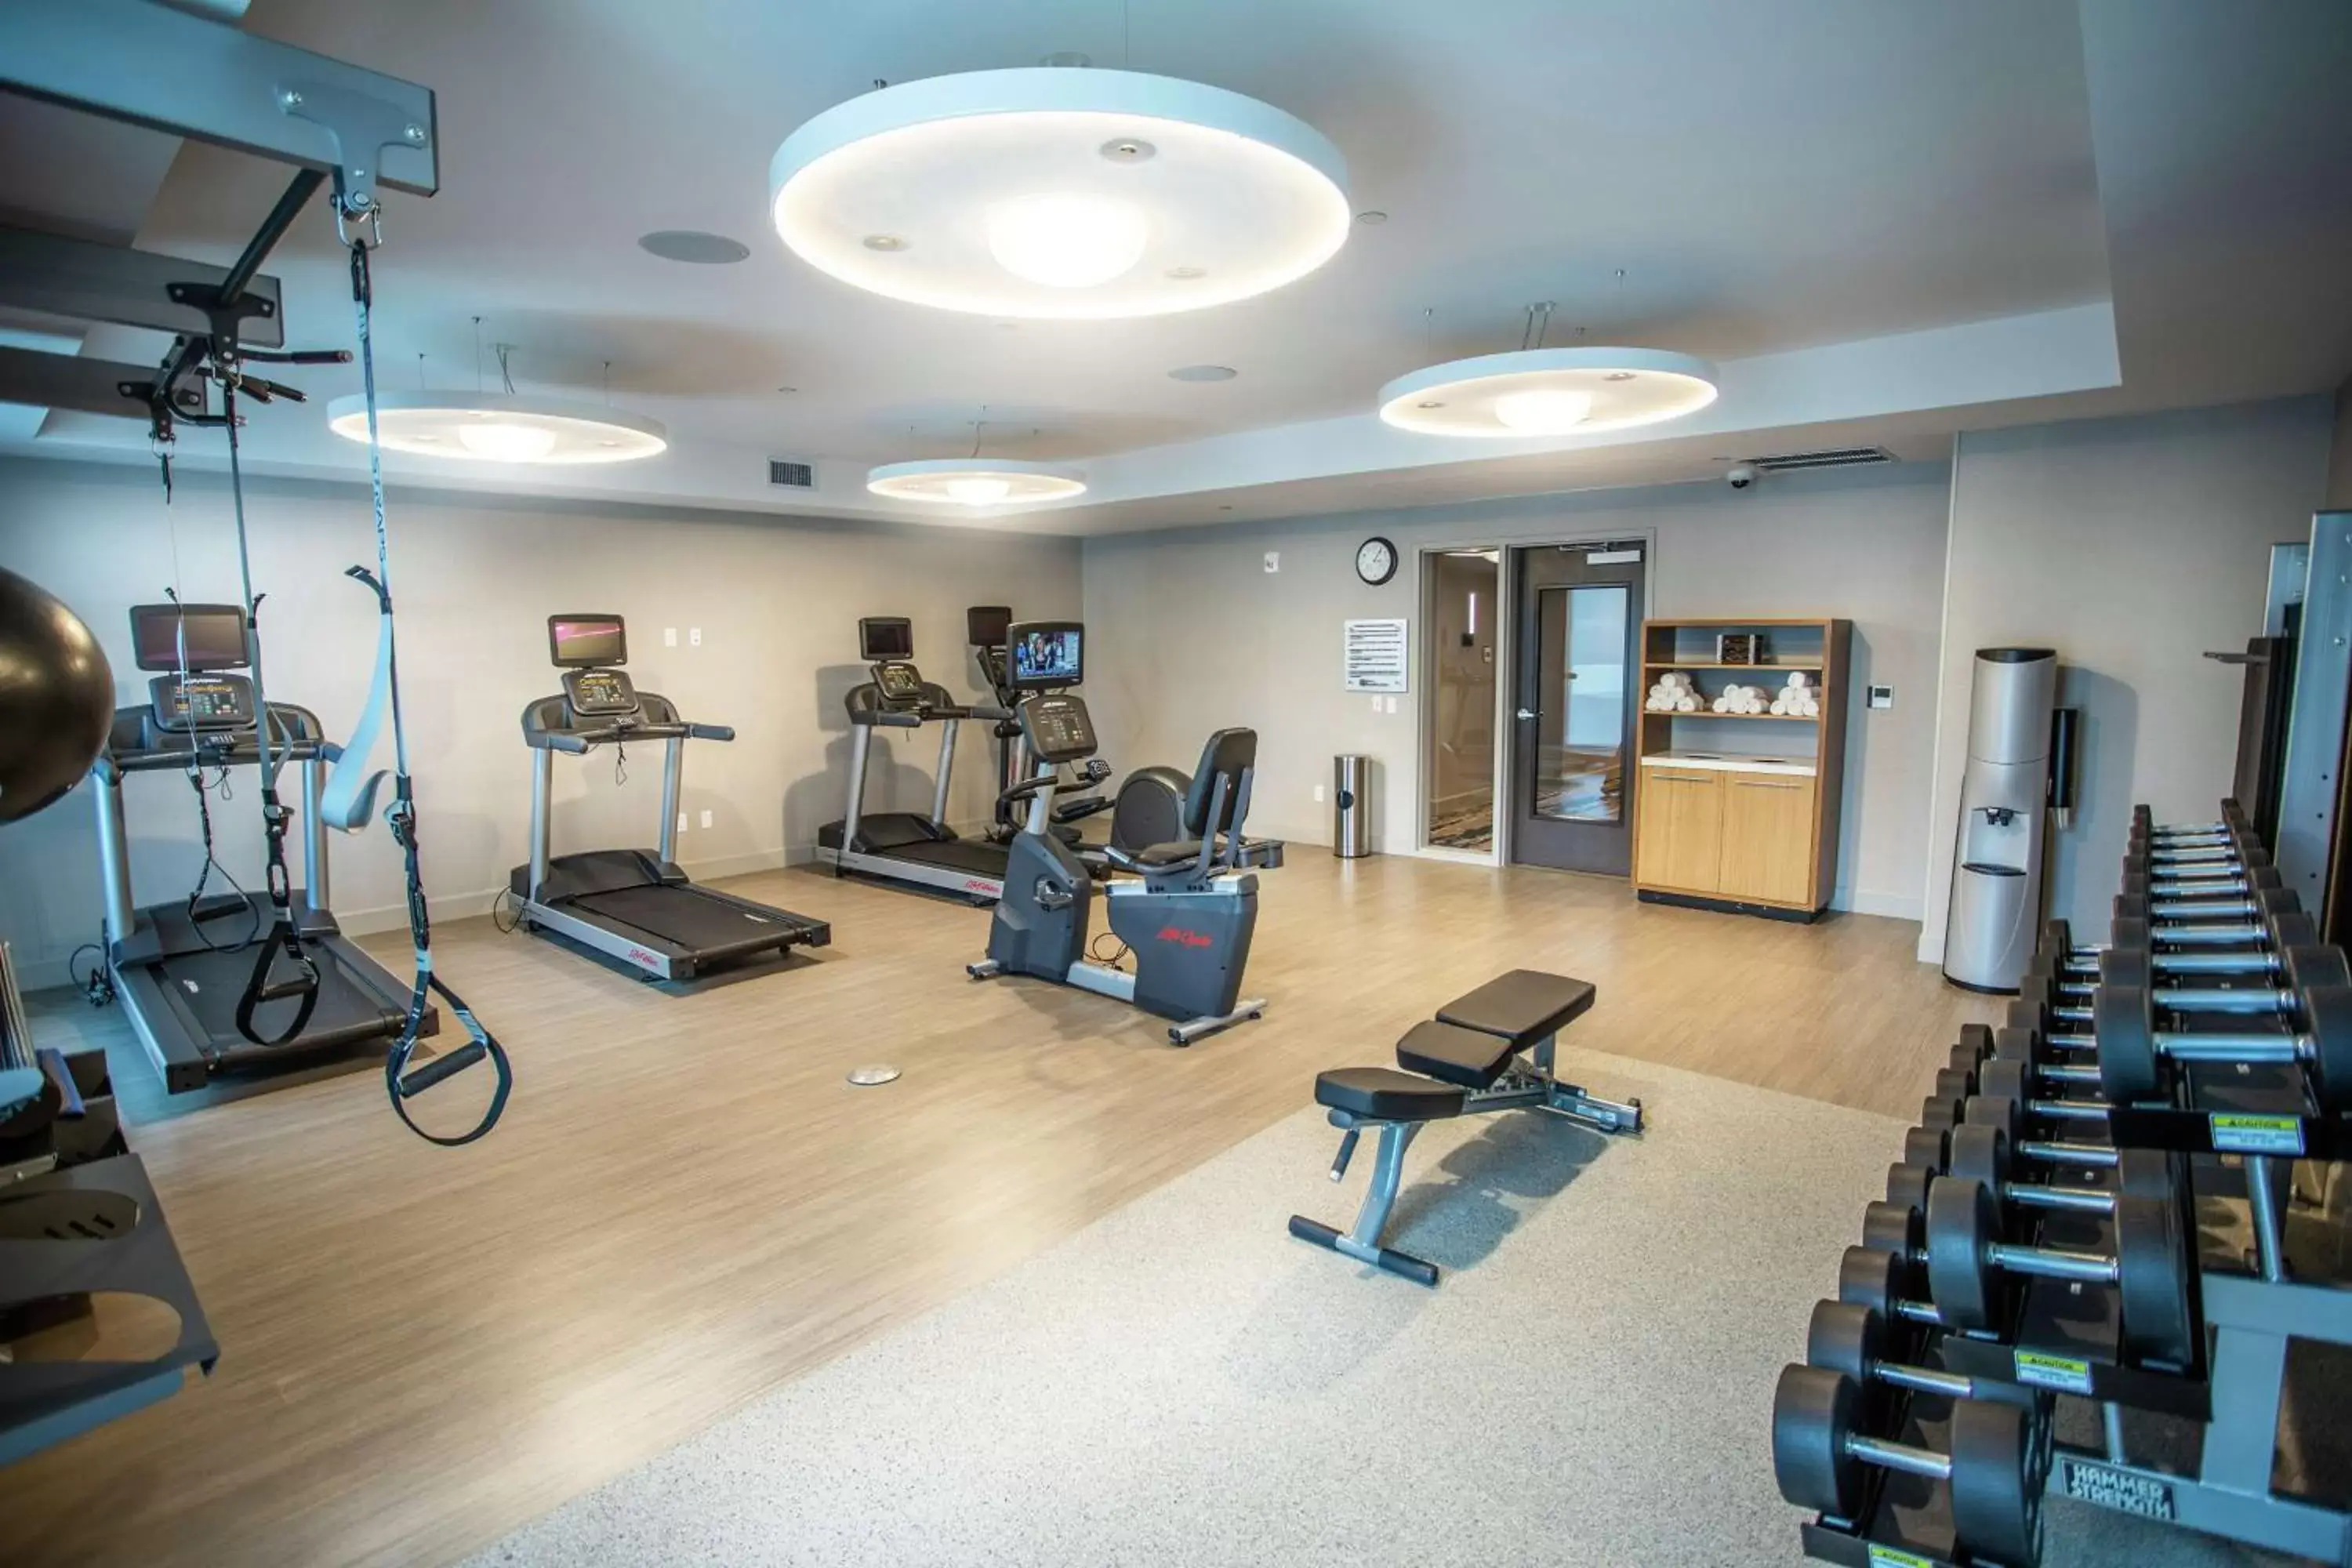 Fitness centre/facilities, Fitness Center/Facilities in Hilton Garden Inn West Palm Beach I95 Outlets